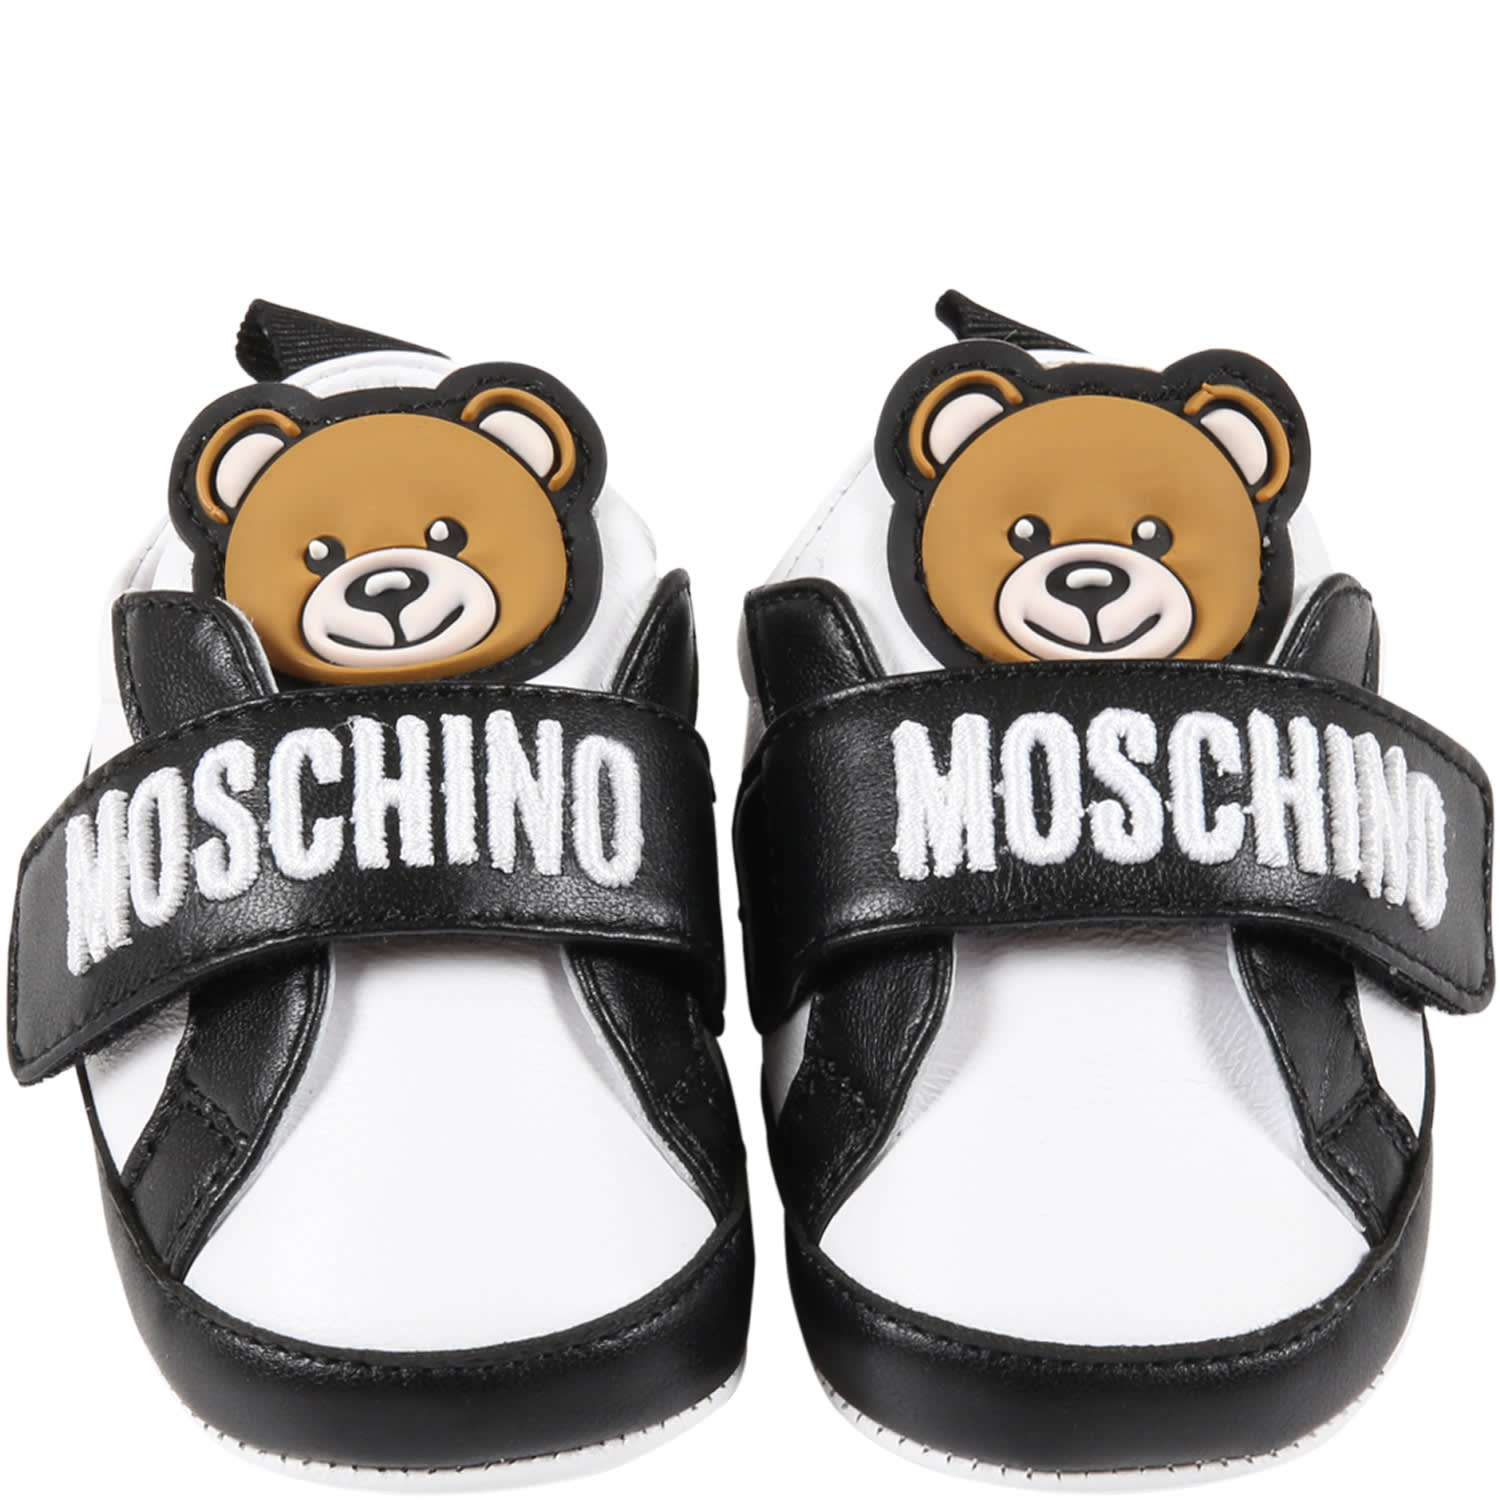 Moschino Multicolor Sneakers For Babykids With Teddy Bear